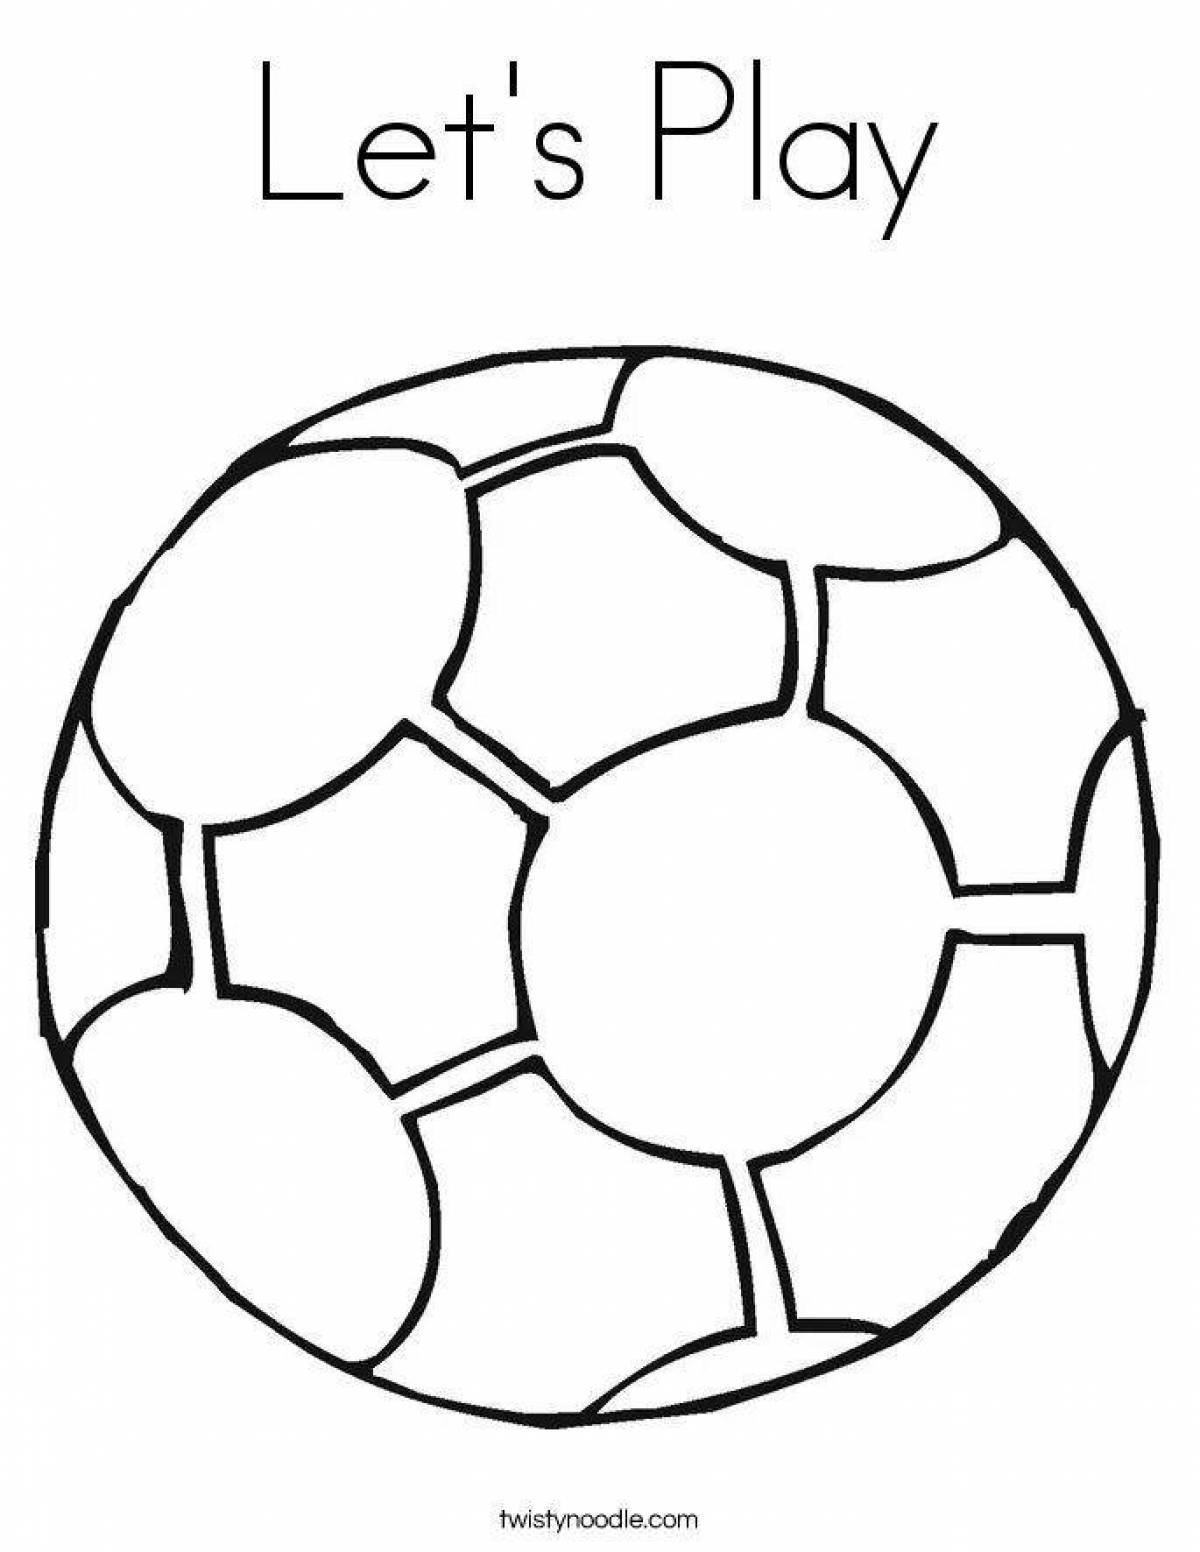 A fun soccer ball coloring book for kids